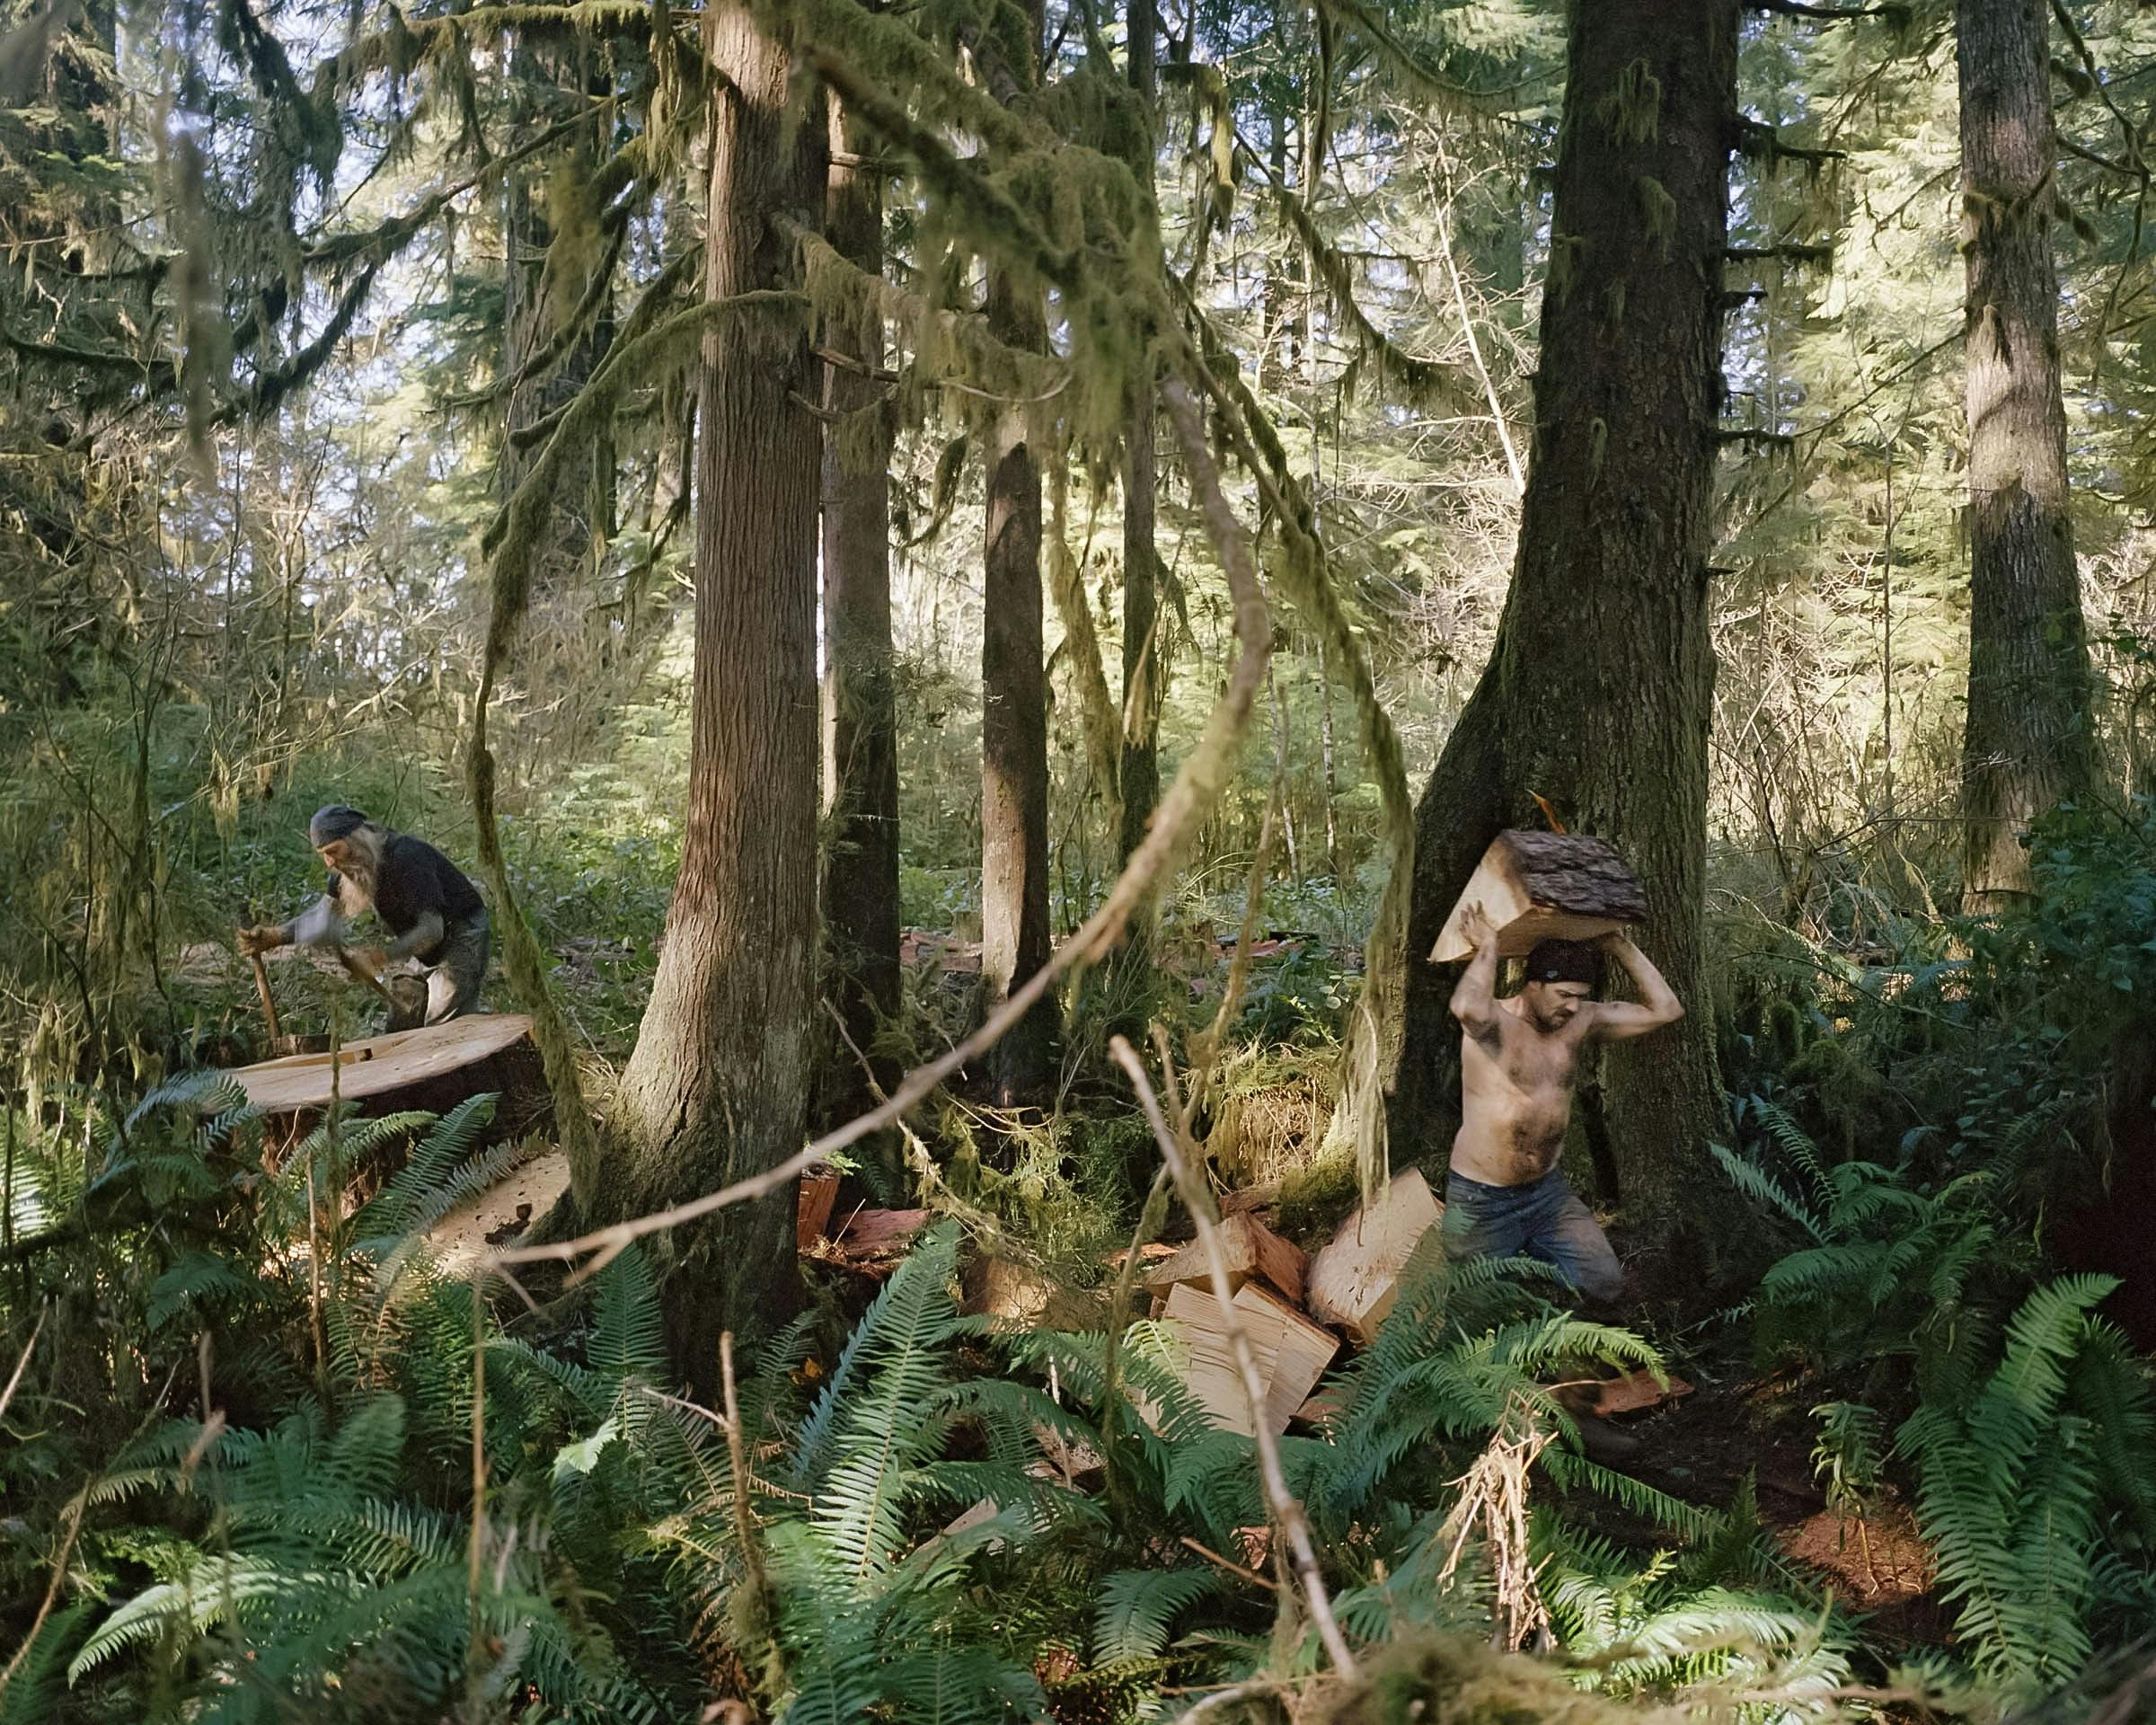 Photography by Anna Beeke titled "The Woodcutters".